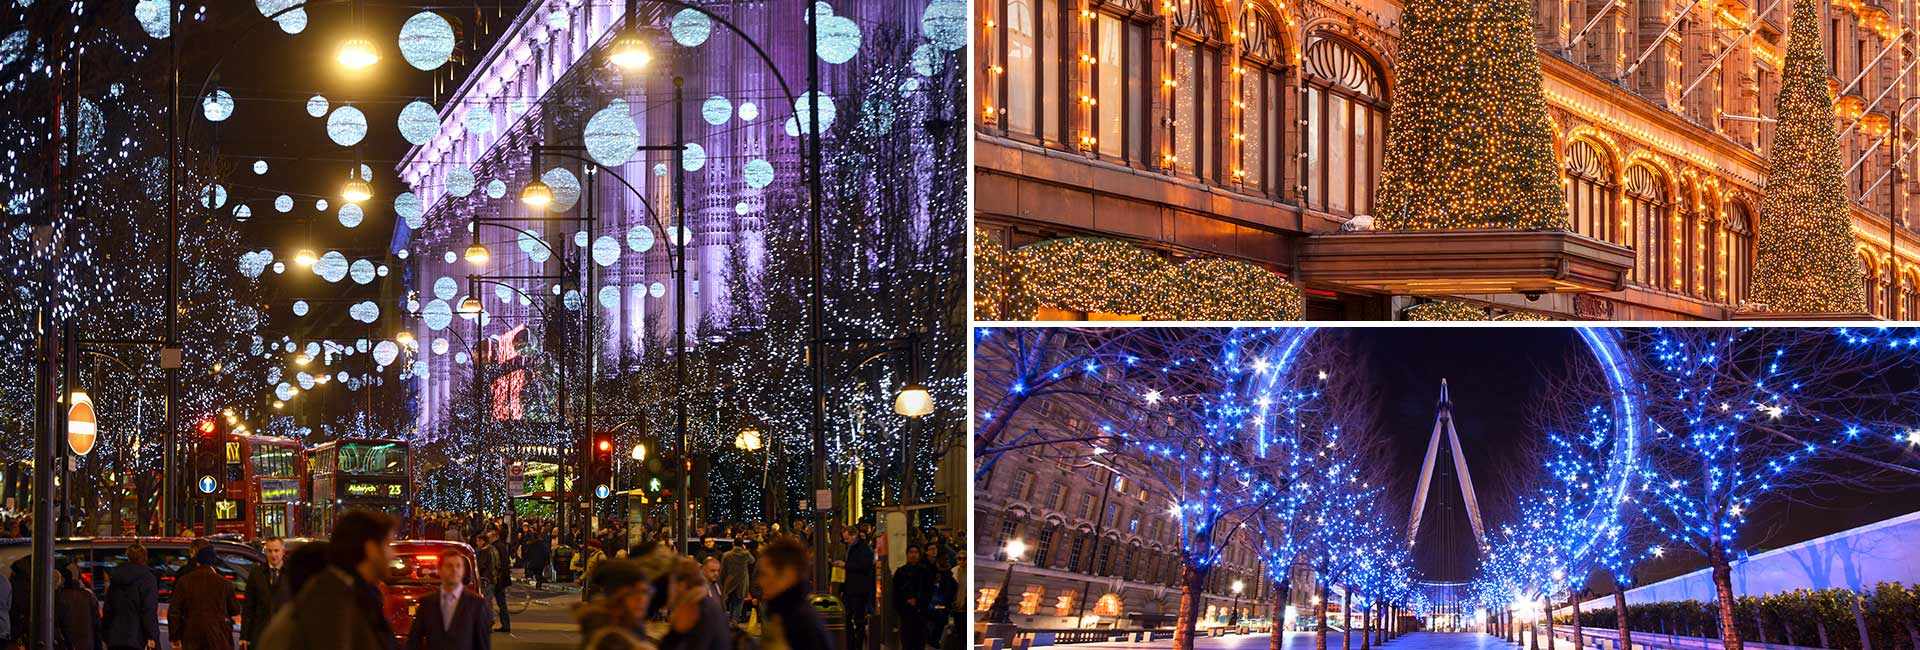 Magical Christmas Light Displays in London, Poster